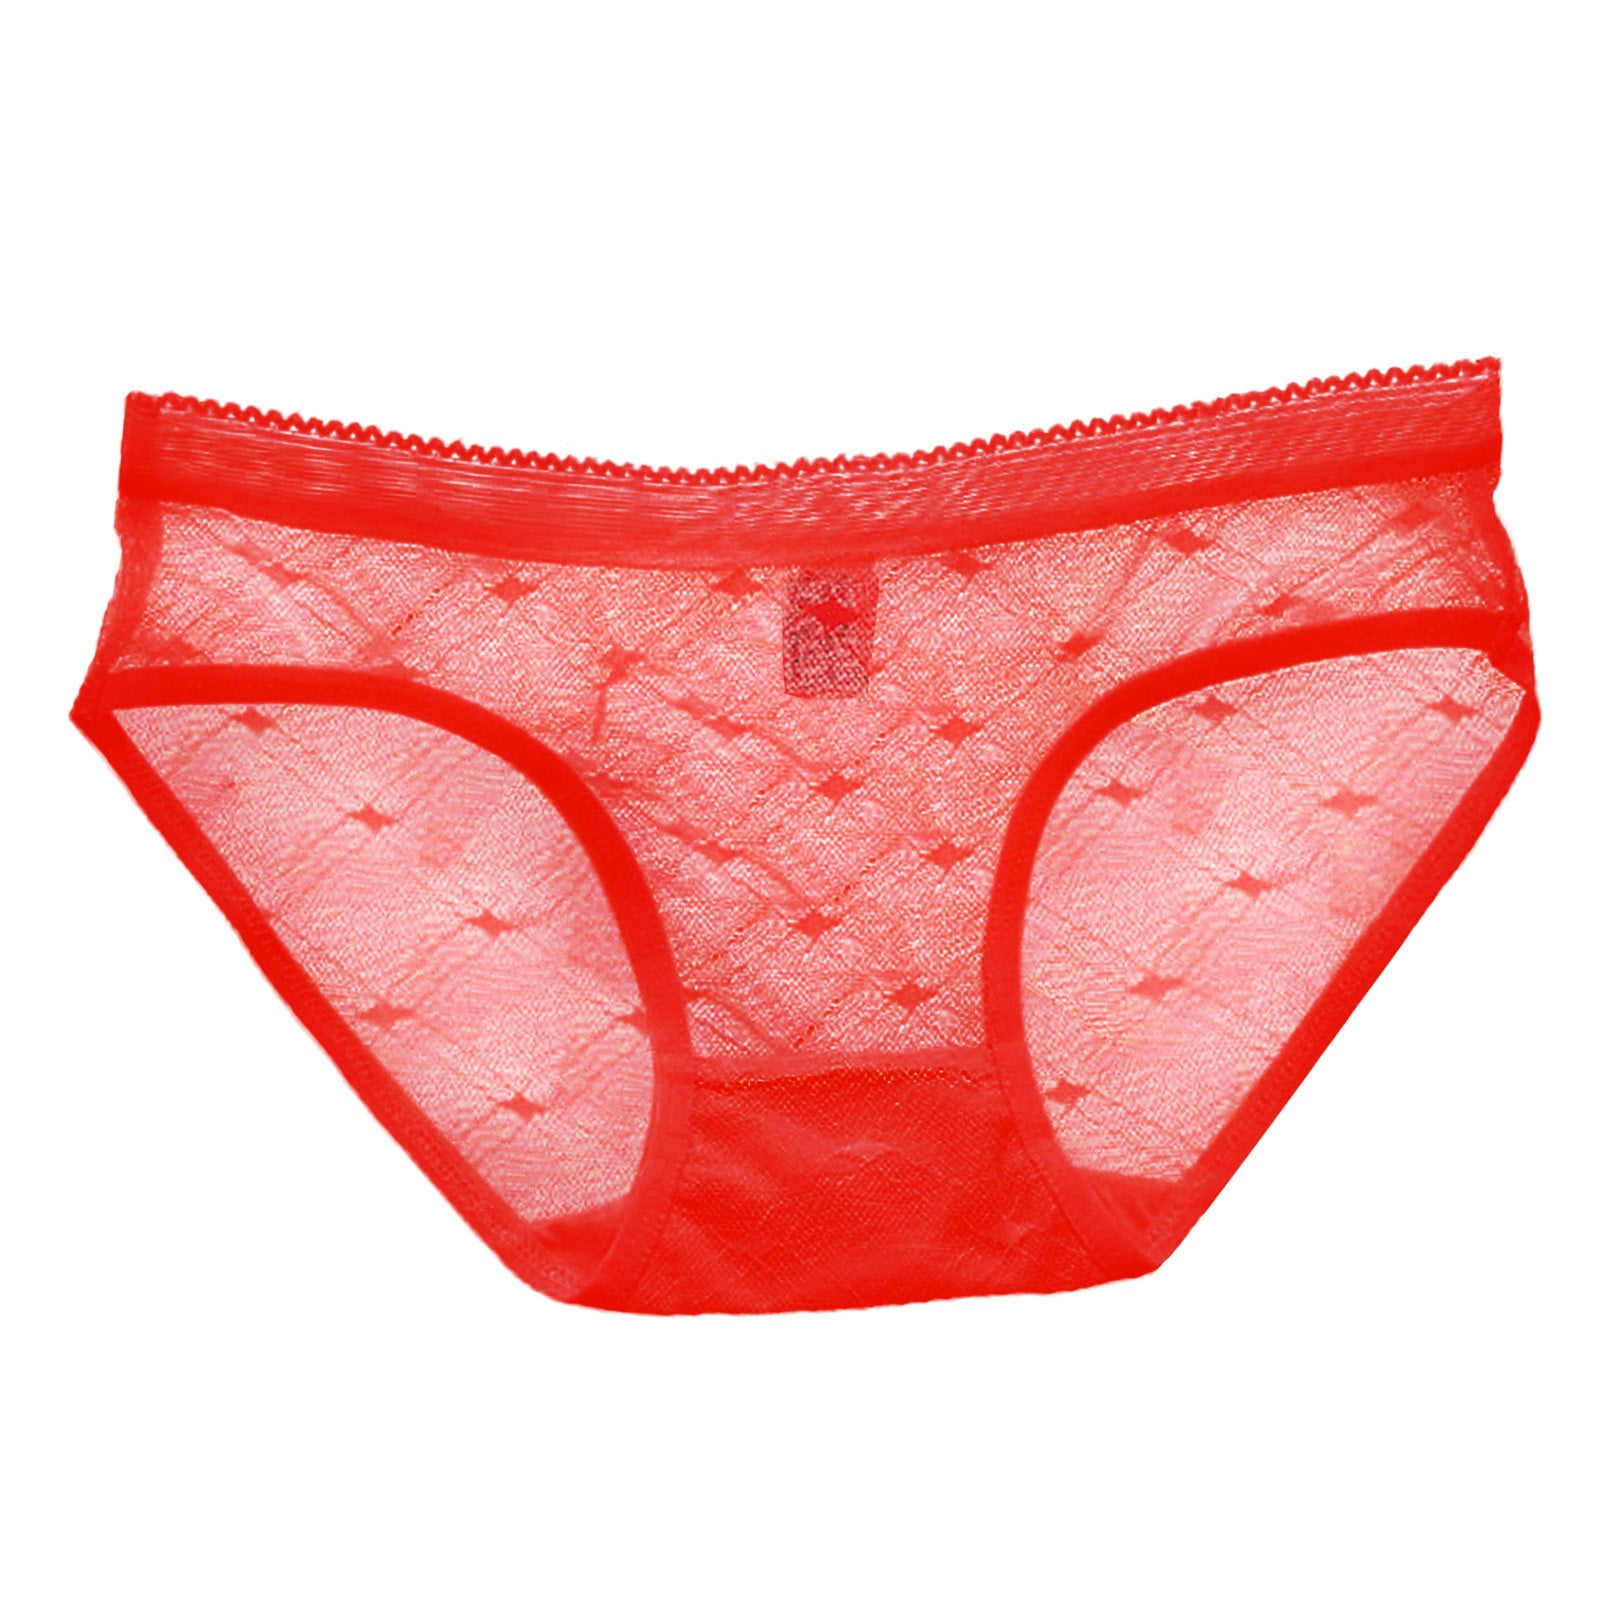 TAIAOJING 6 Pack Women's Underwear Briefs Sheer Lace Panties See Through  Mesh Cotton Crotch Seamless Briefs 